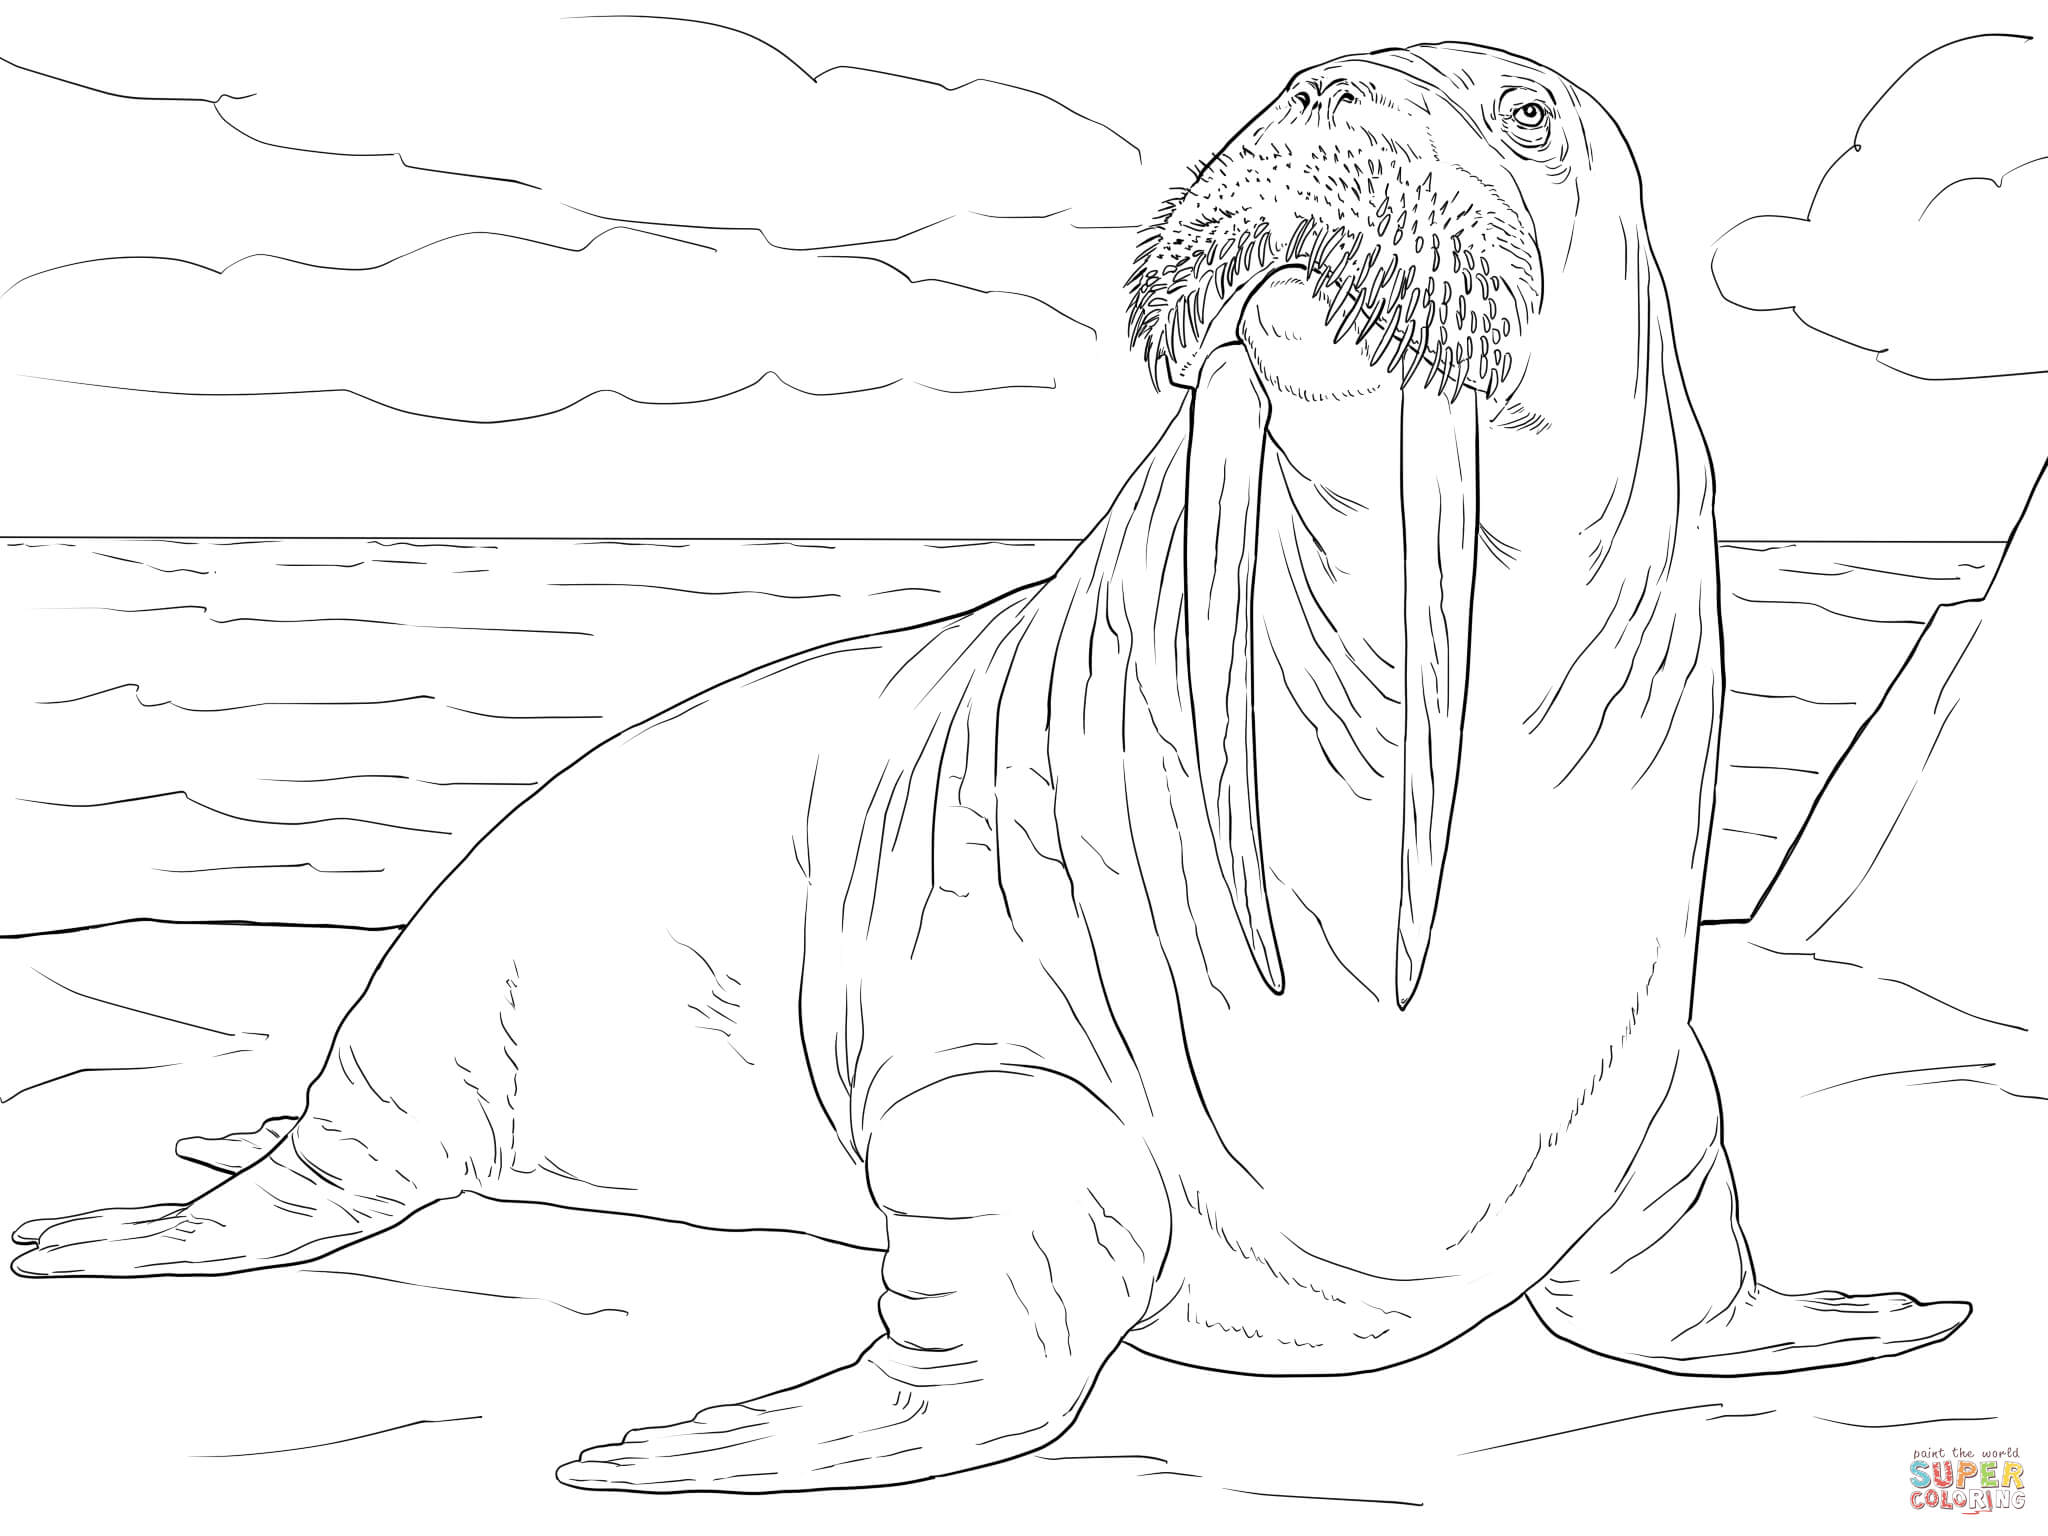 Adult Male Walrus coloring page | Free Printable Coloring Pages